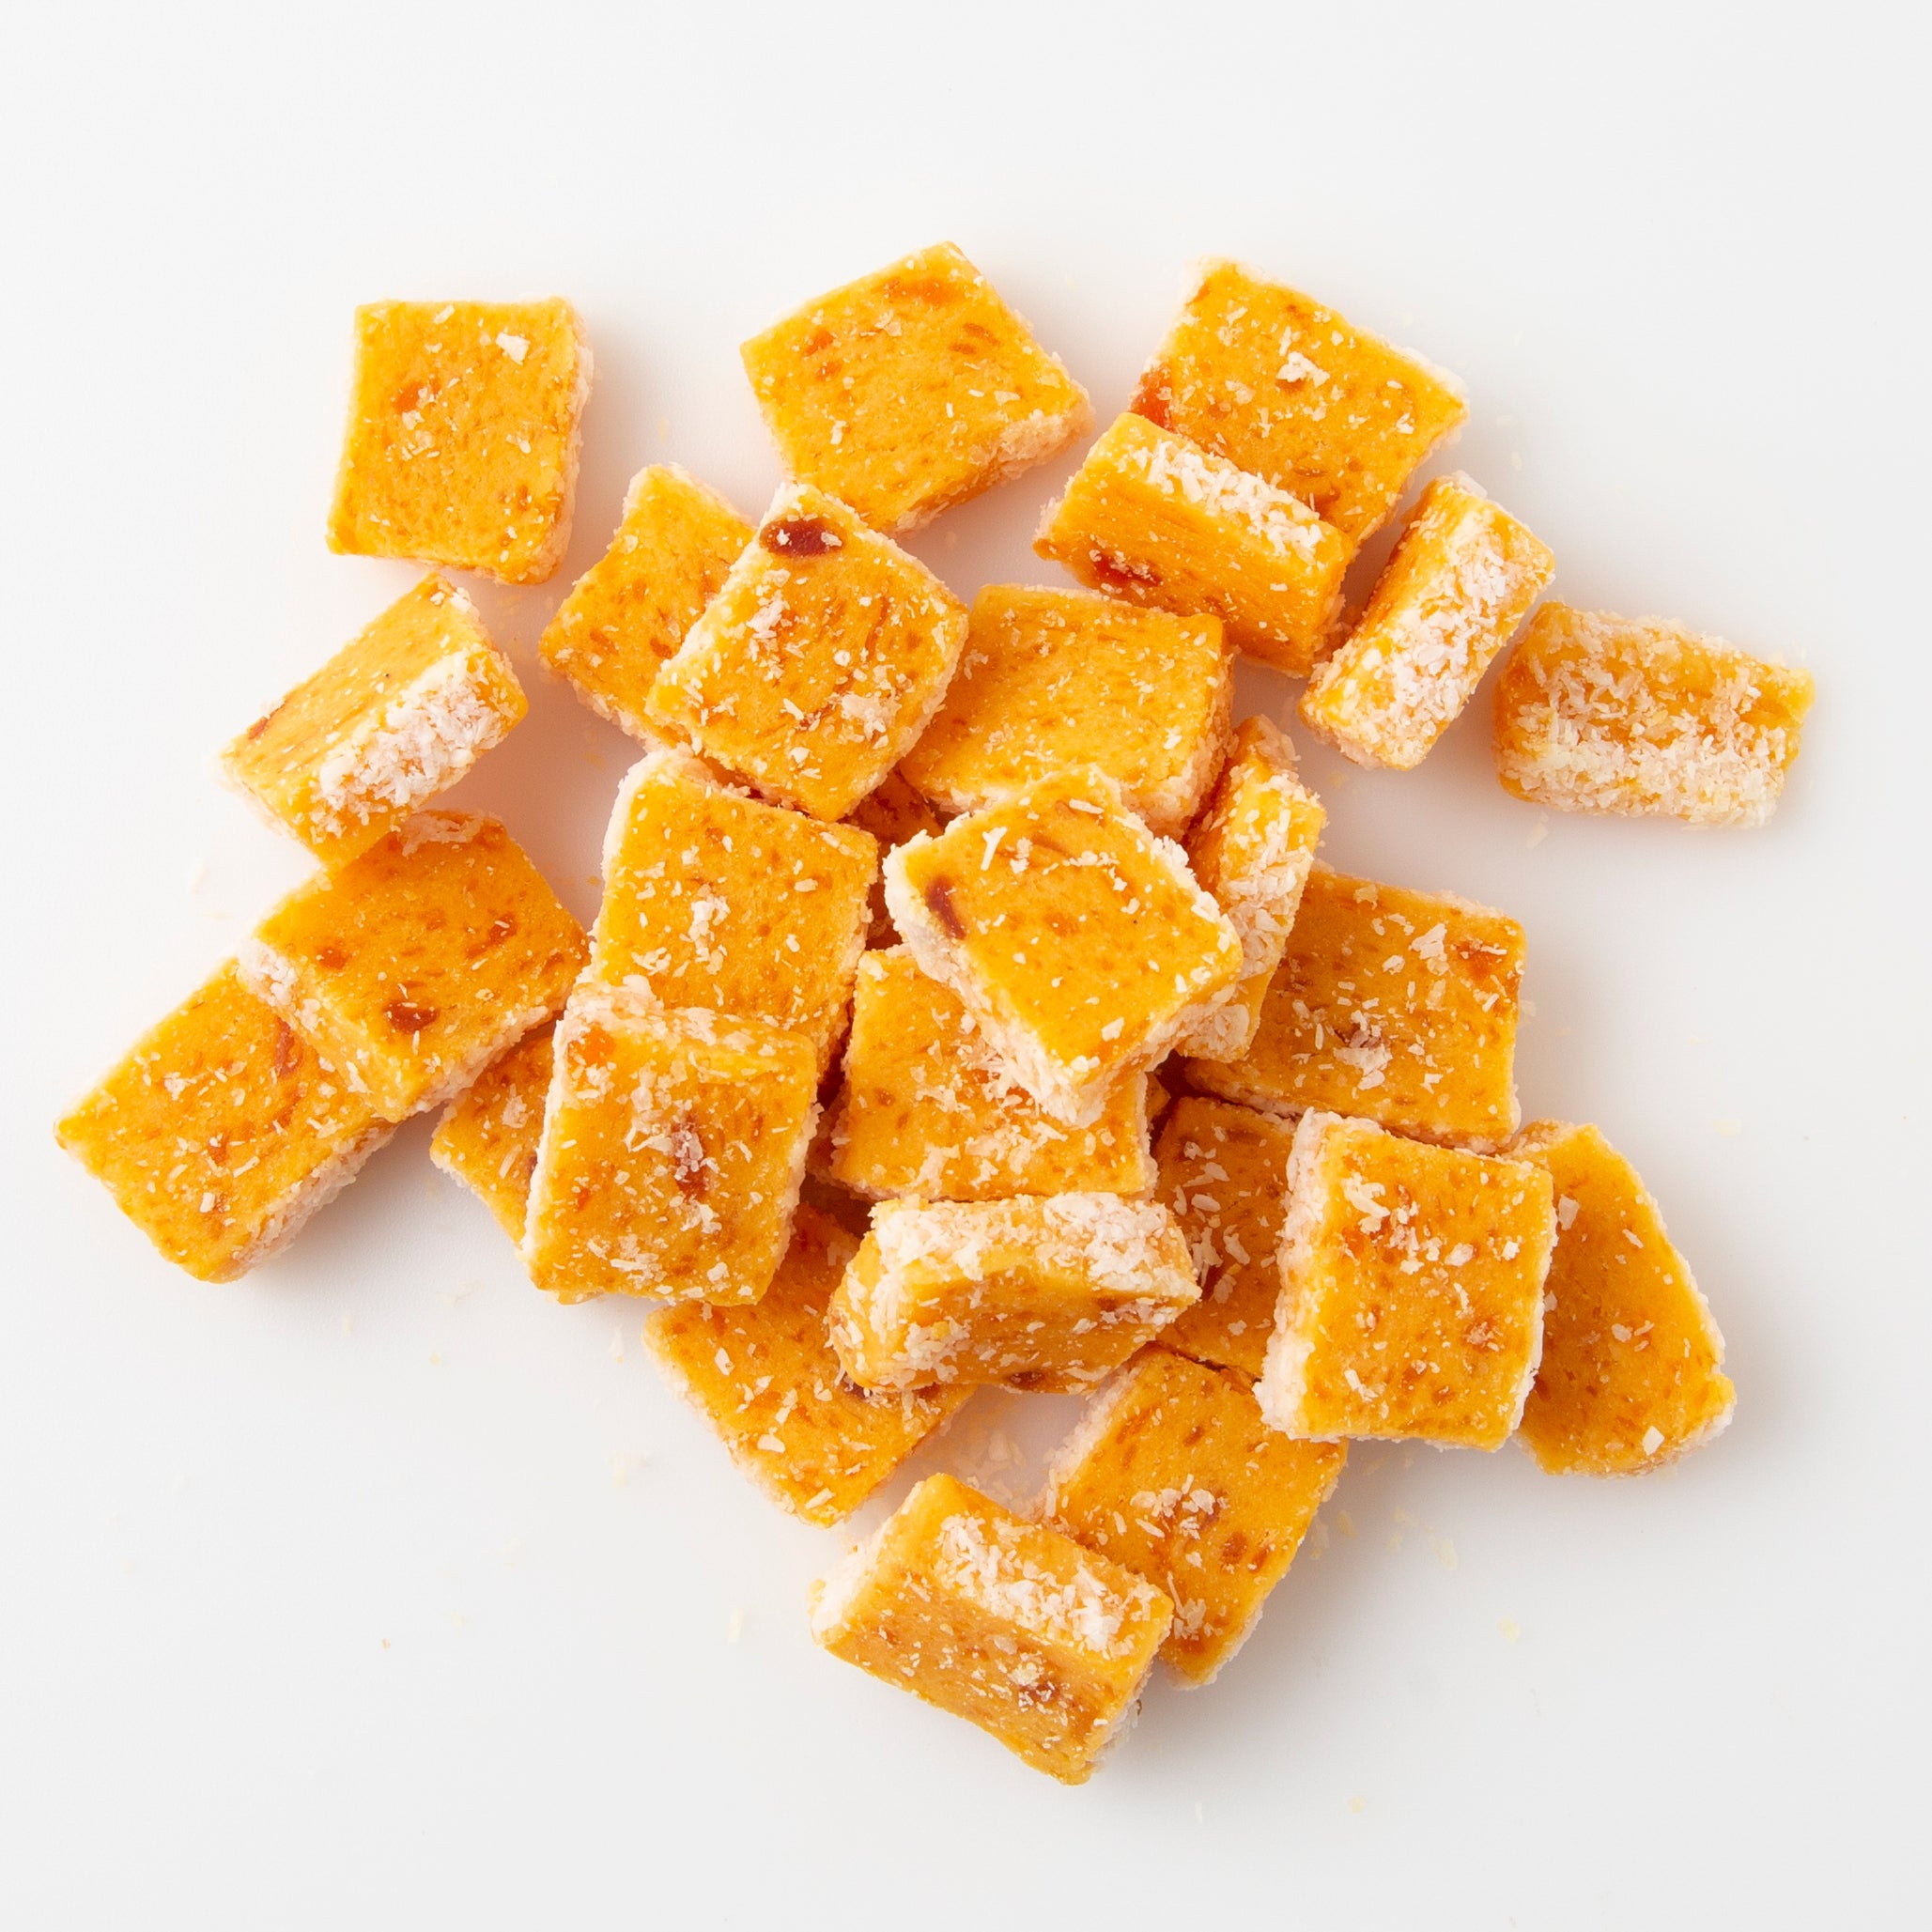 Dried Apricot Slice (Snacks) Image 3 - Naked Foods